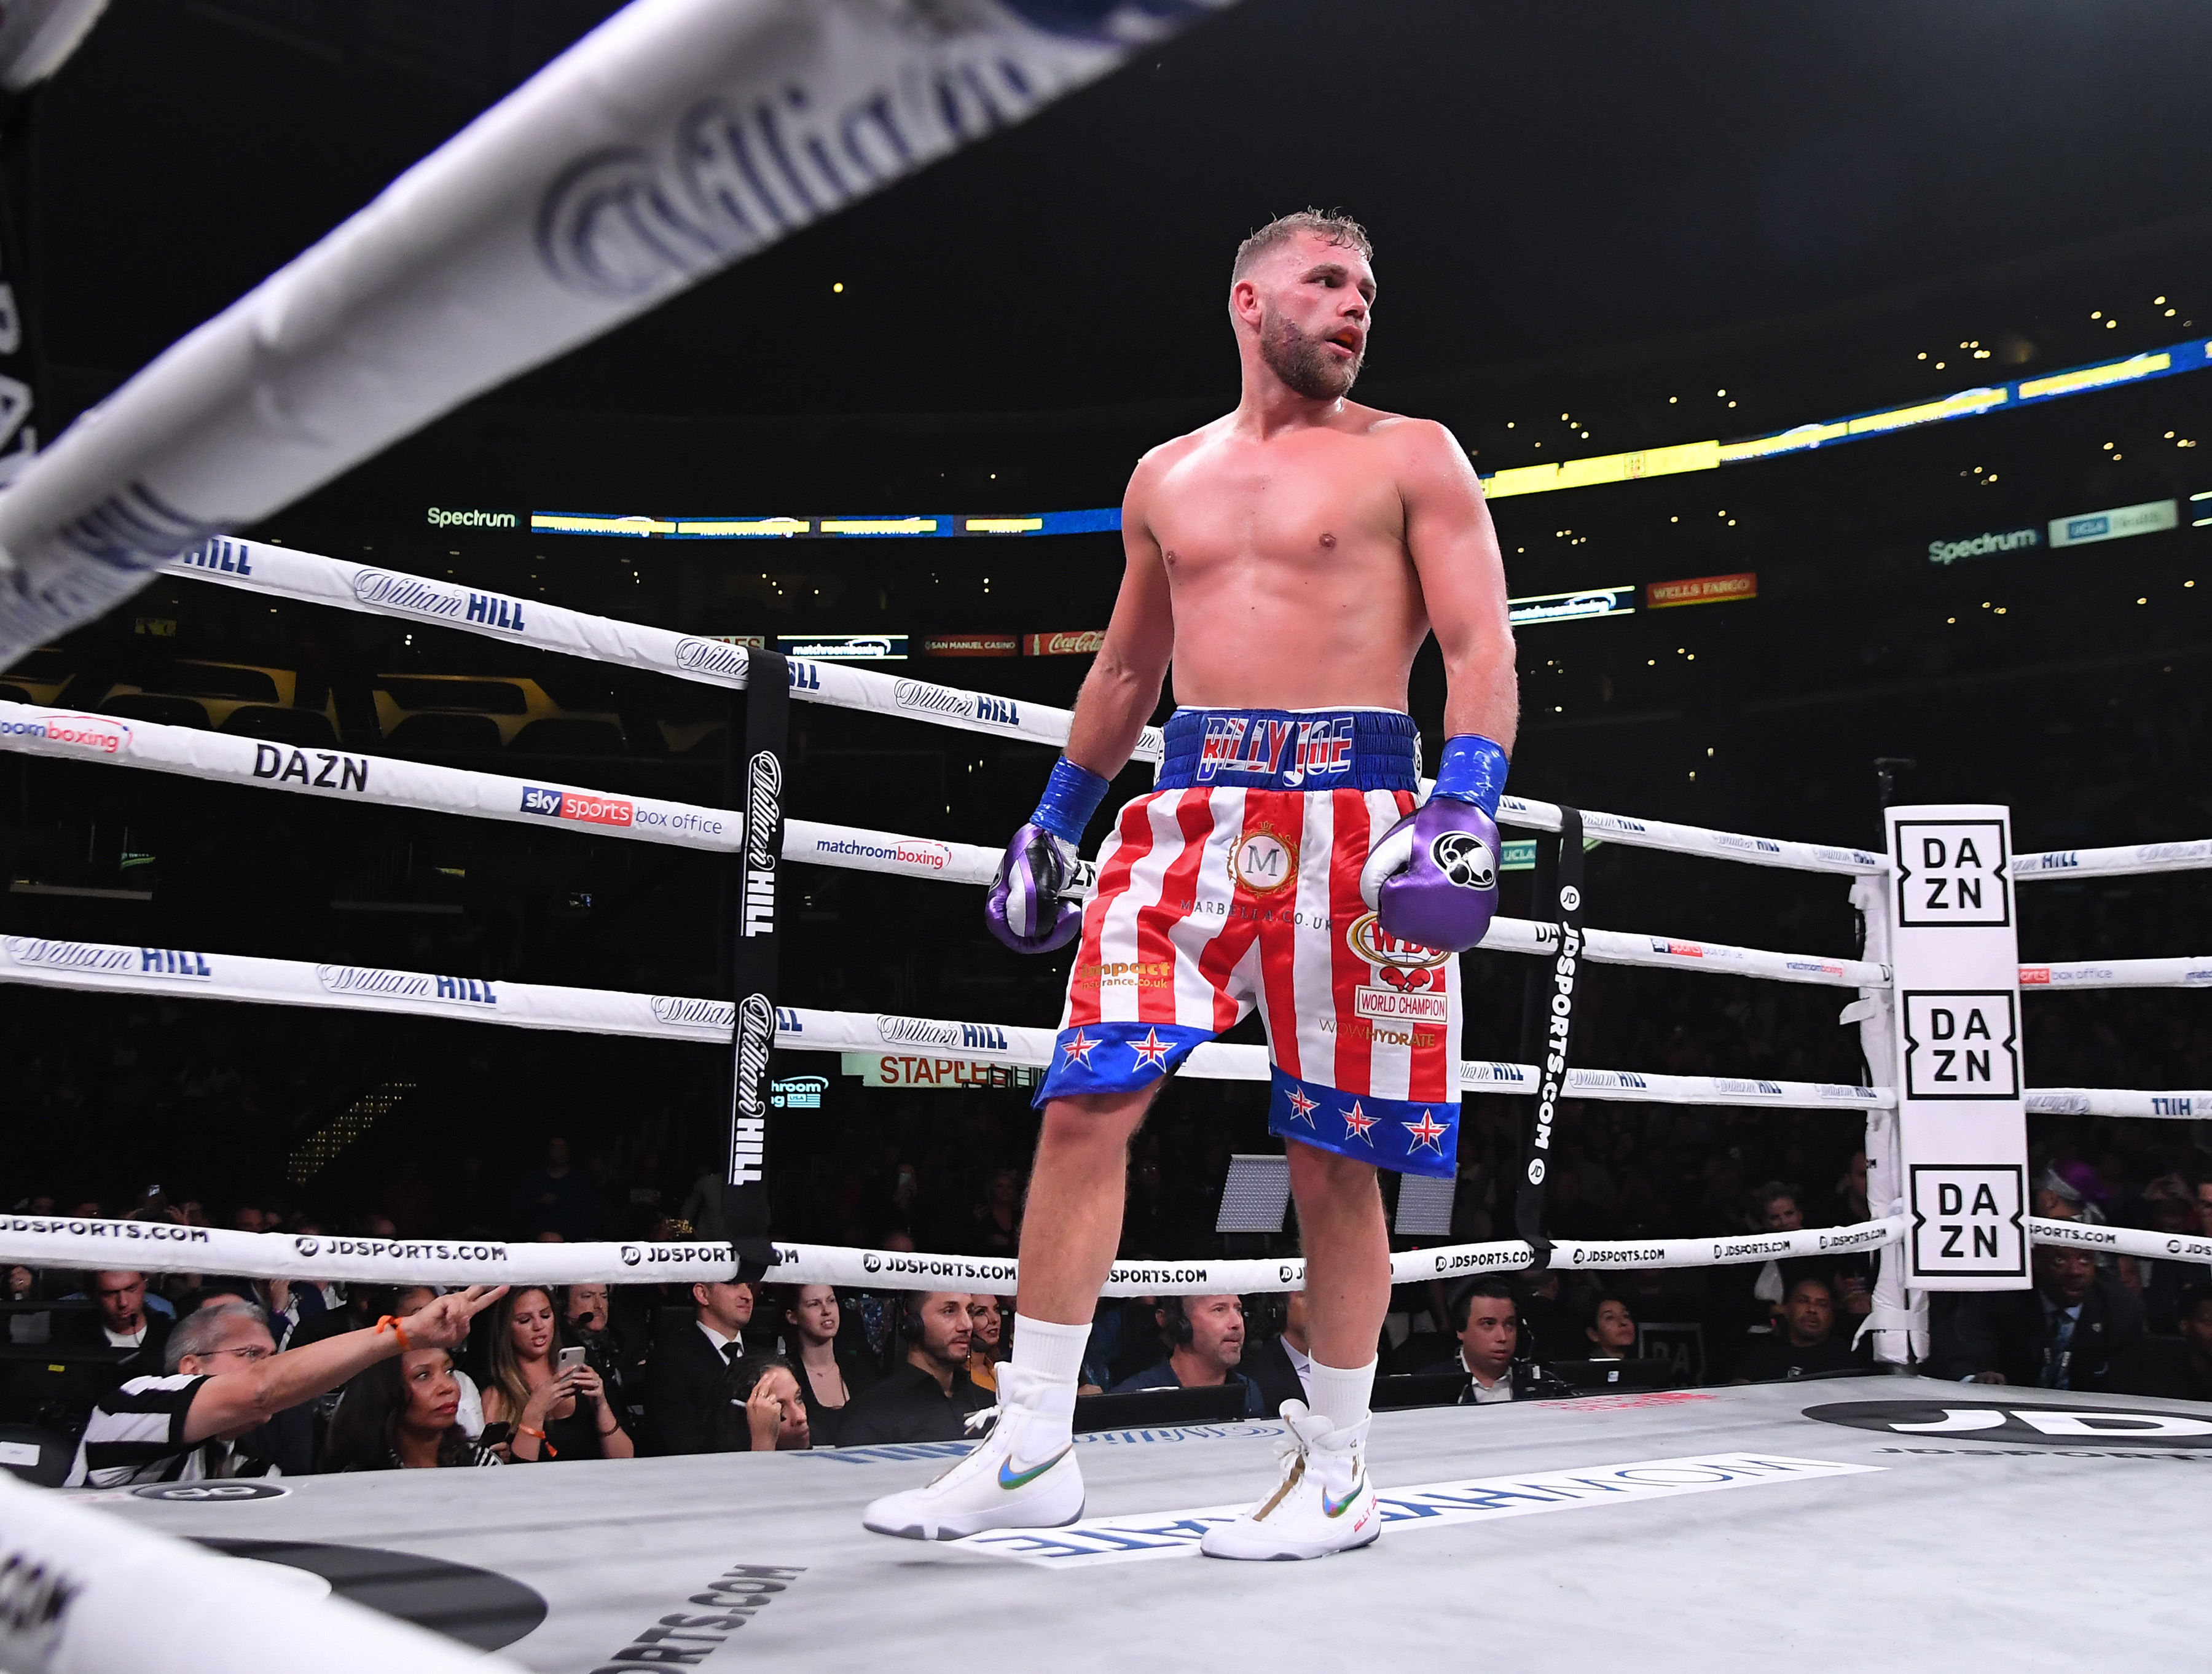 Billy Joe Saunders standing in the ring during a boxing match